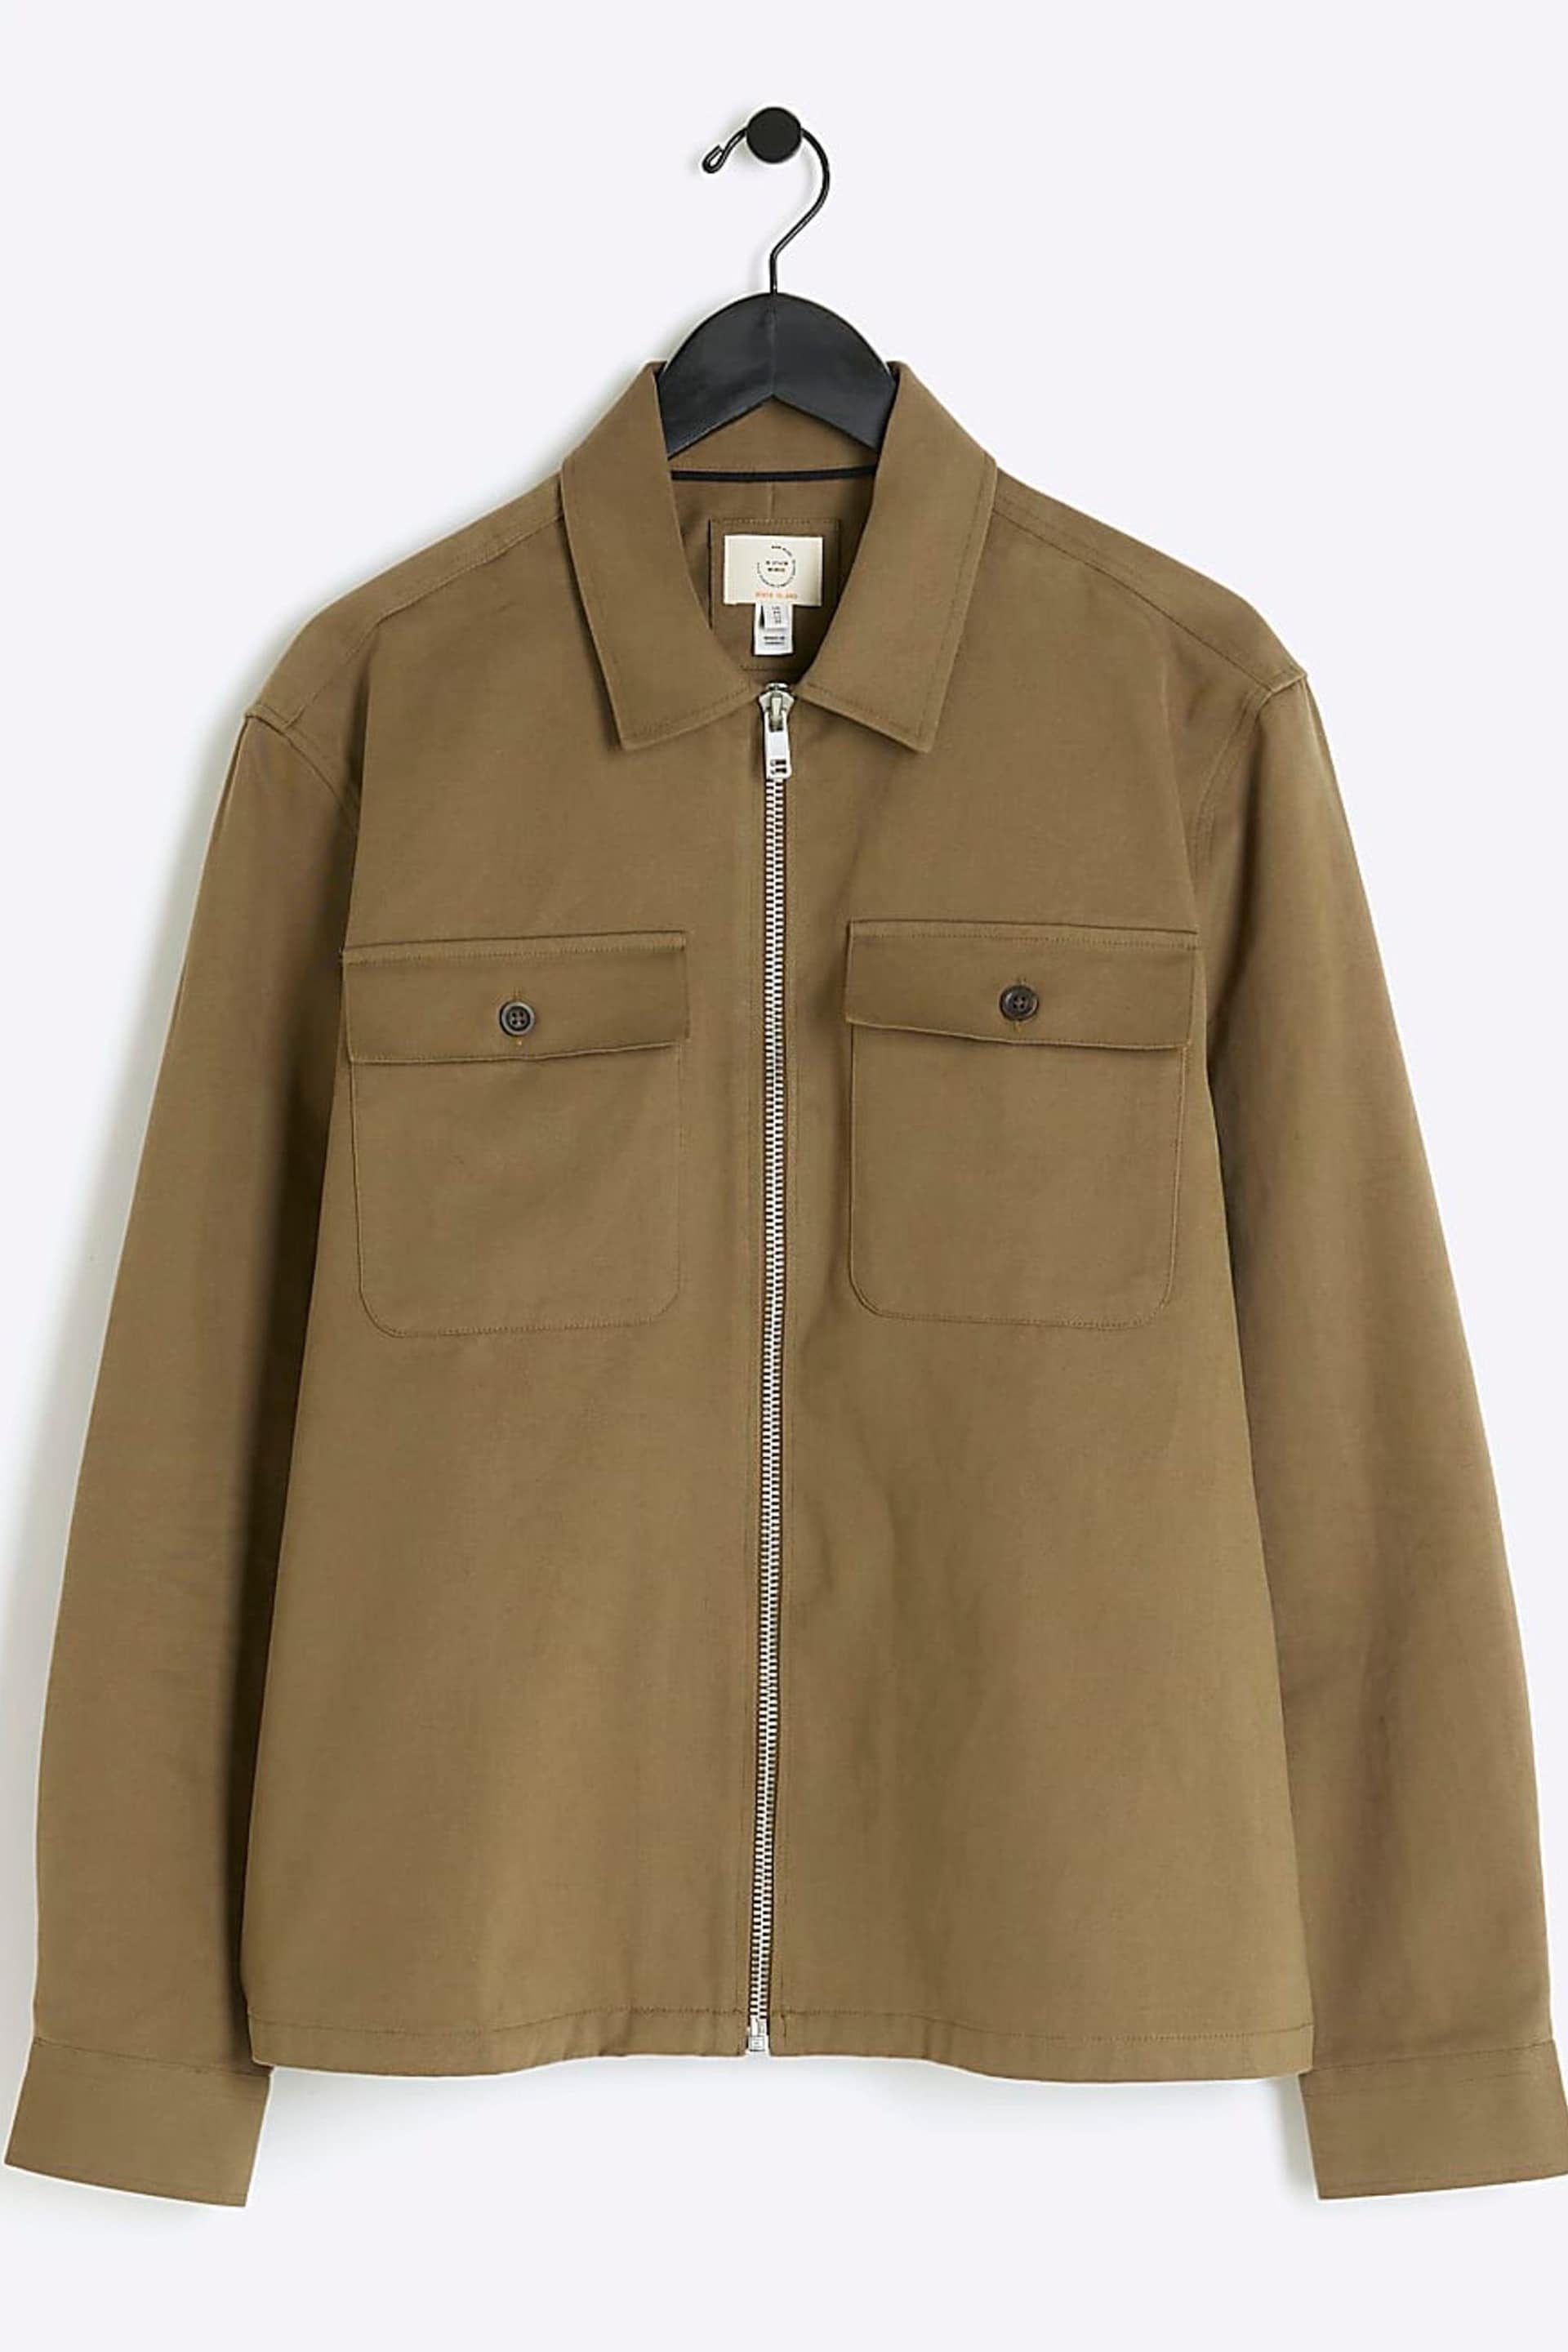 River Island Brown Zipper Front Overshirt - Image 5 of 6